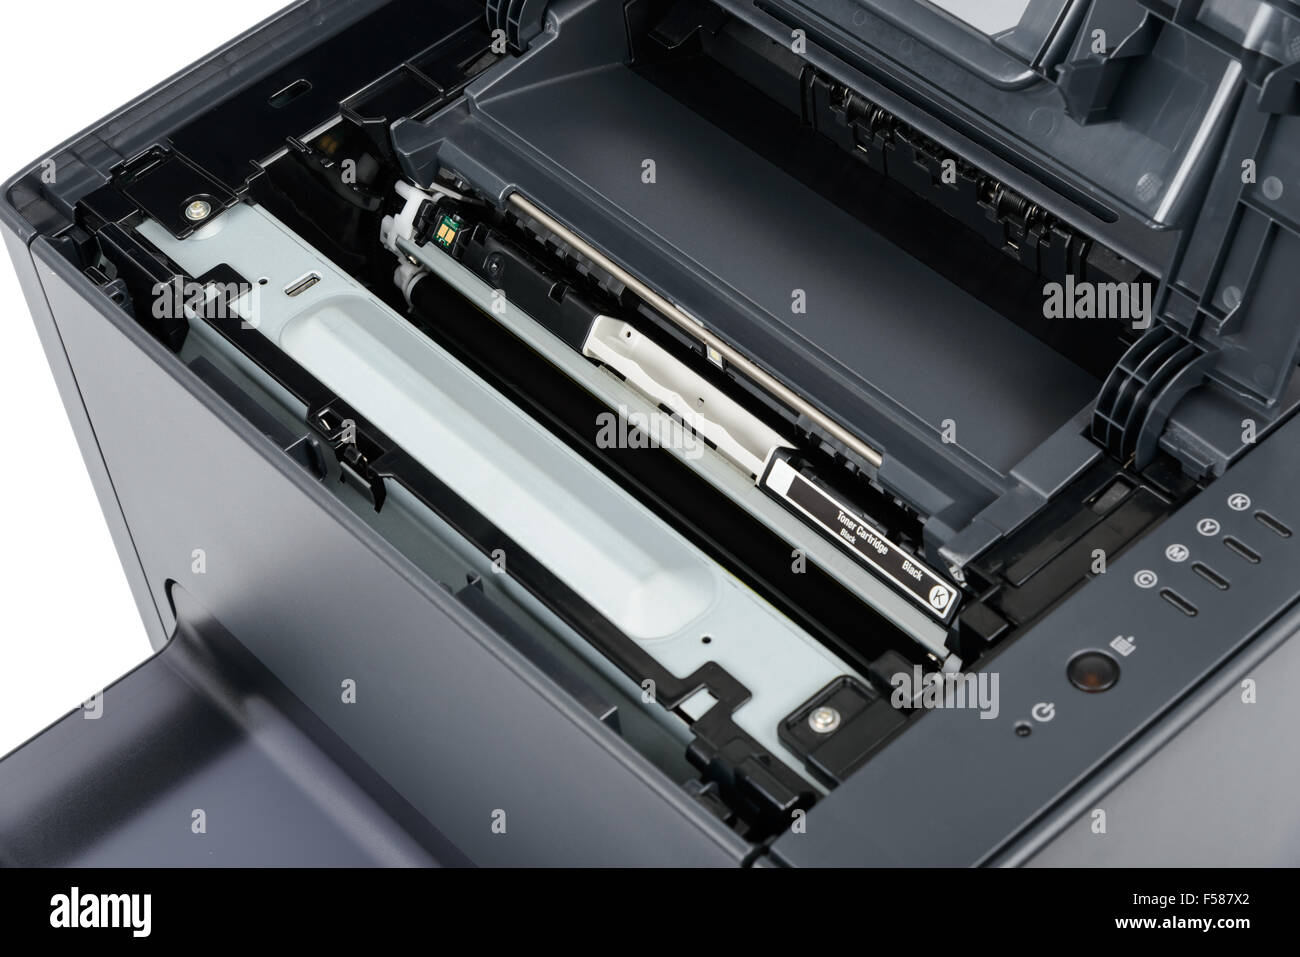 replace black toner cartridge in a laser printer, isolated on white Stock Photo